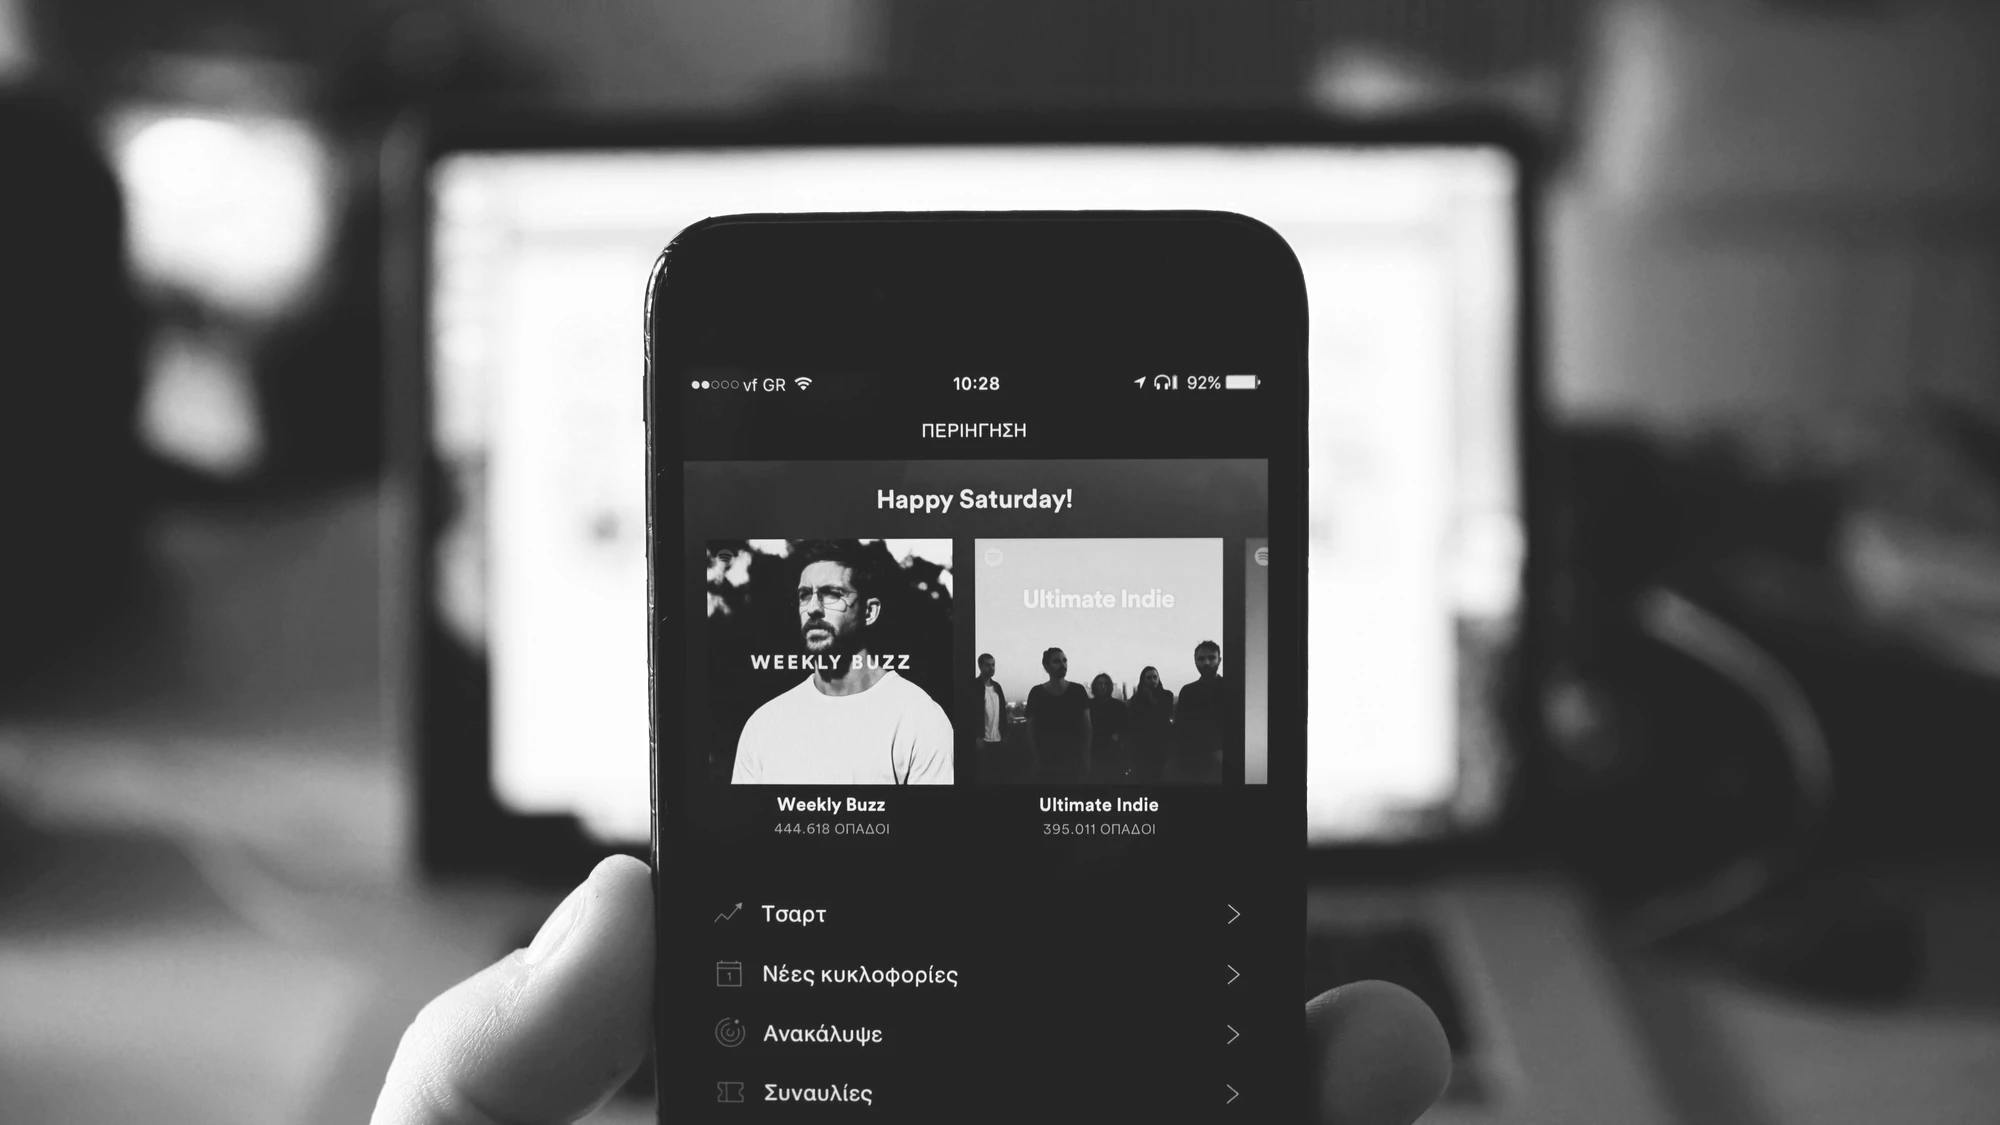 A person holds a phone in the middle of the screen with Spotify rendered on the screen. The 'Weekly Buzz' and 'Ultimate Indie' playlists button are prominent.